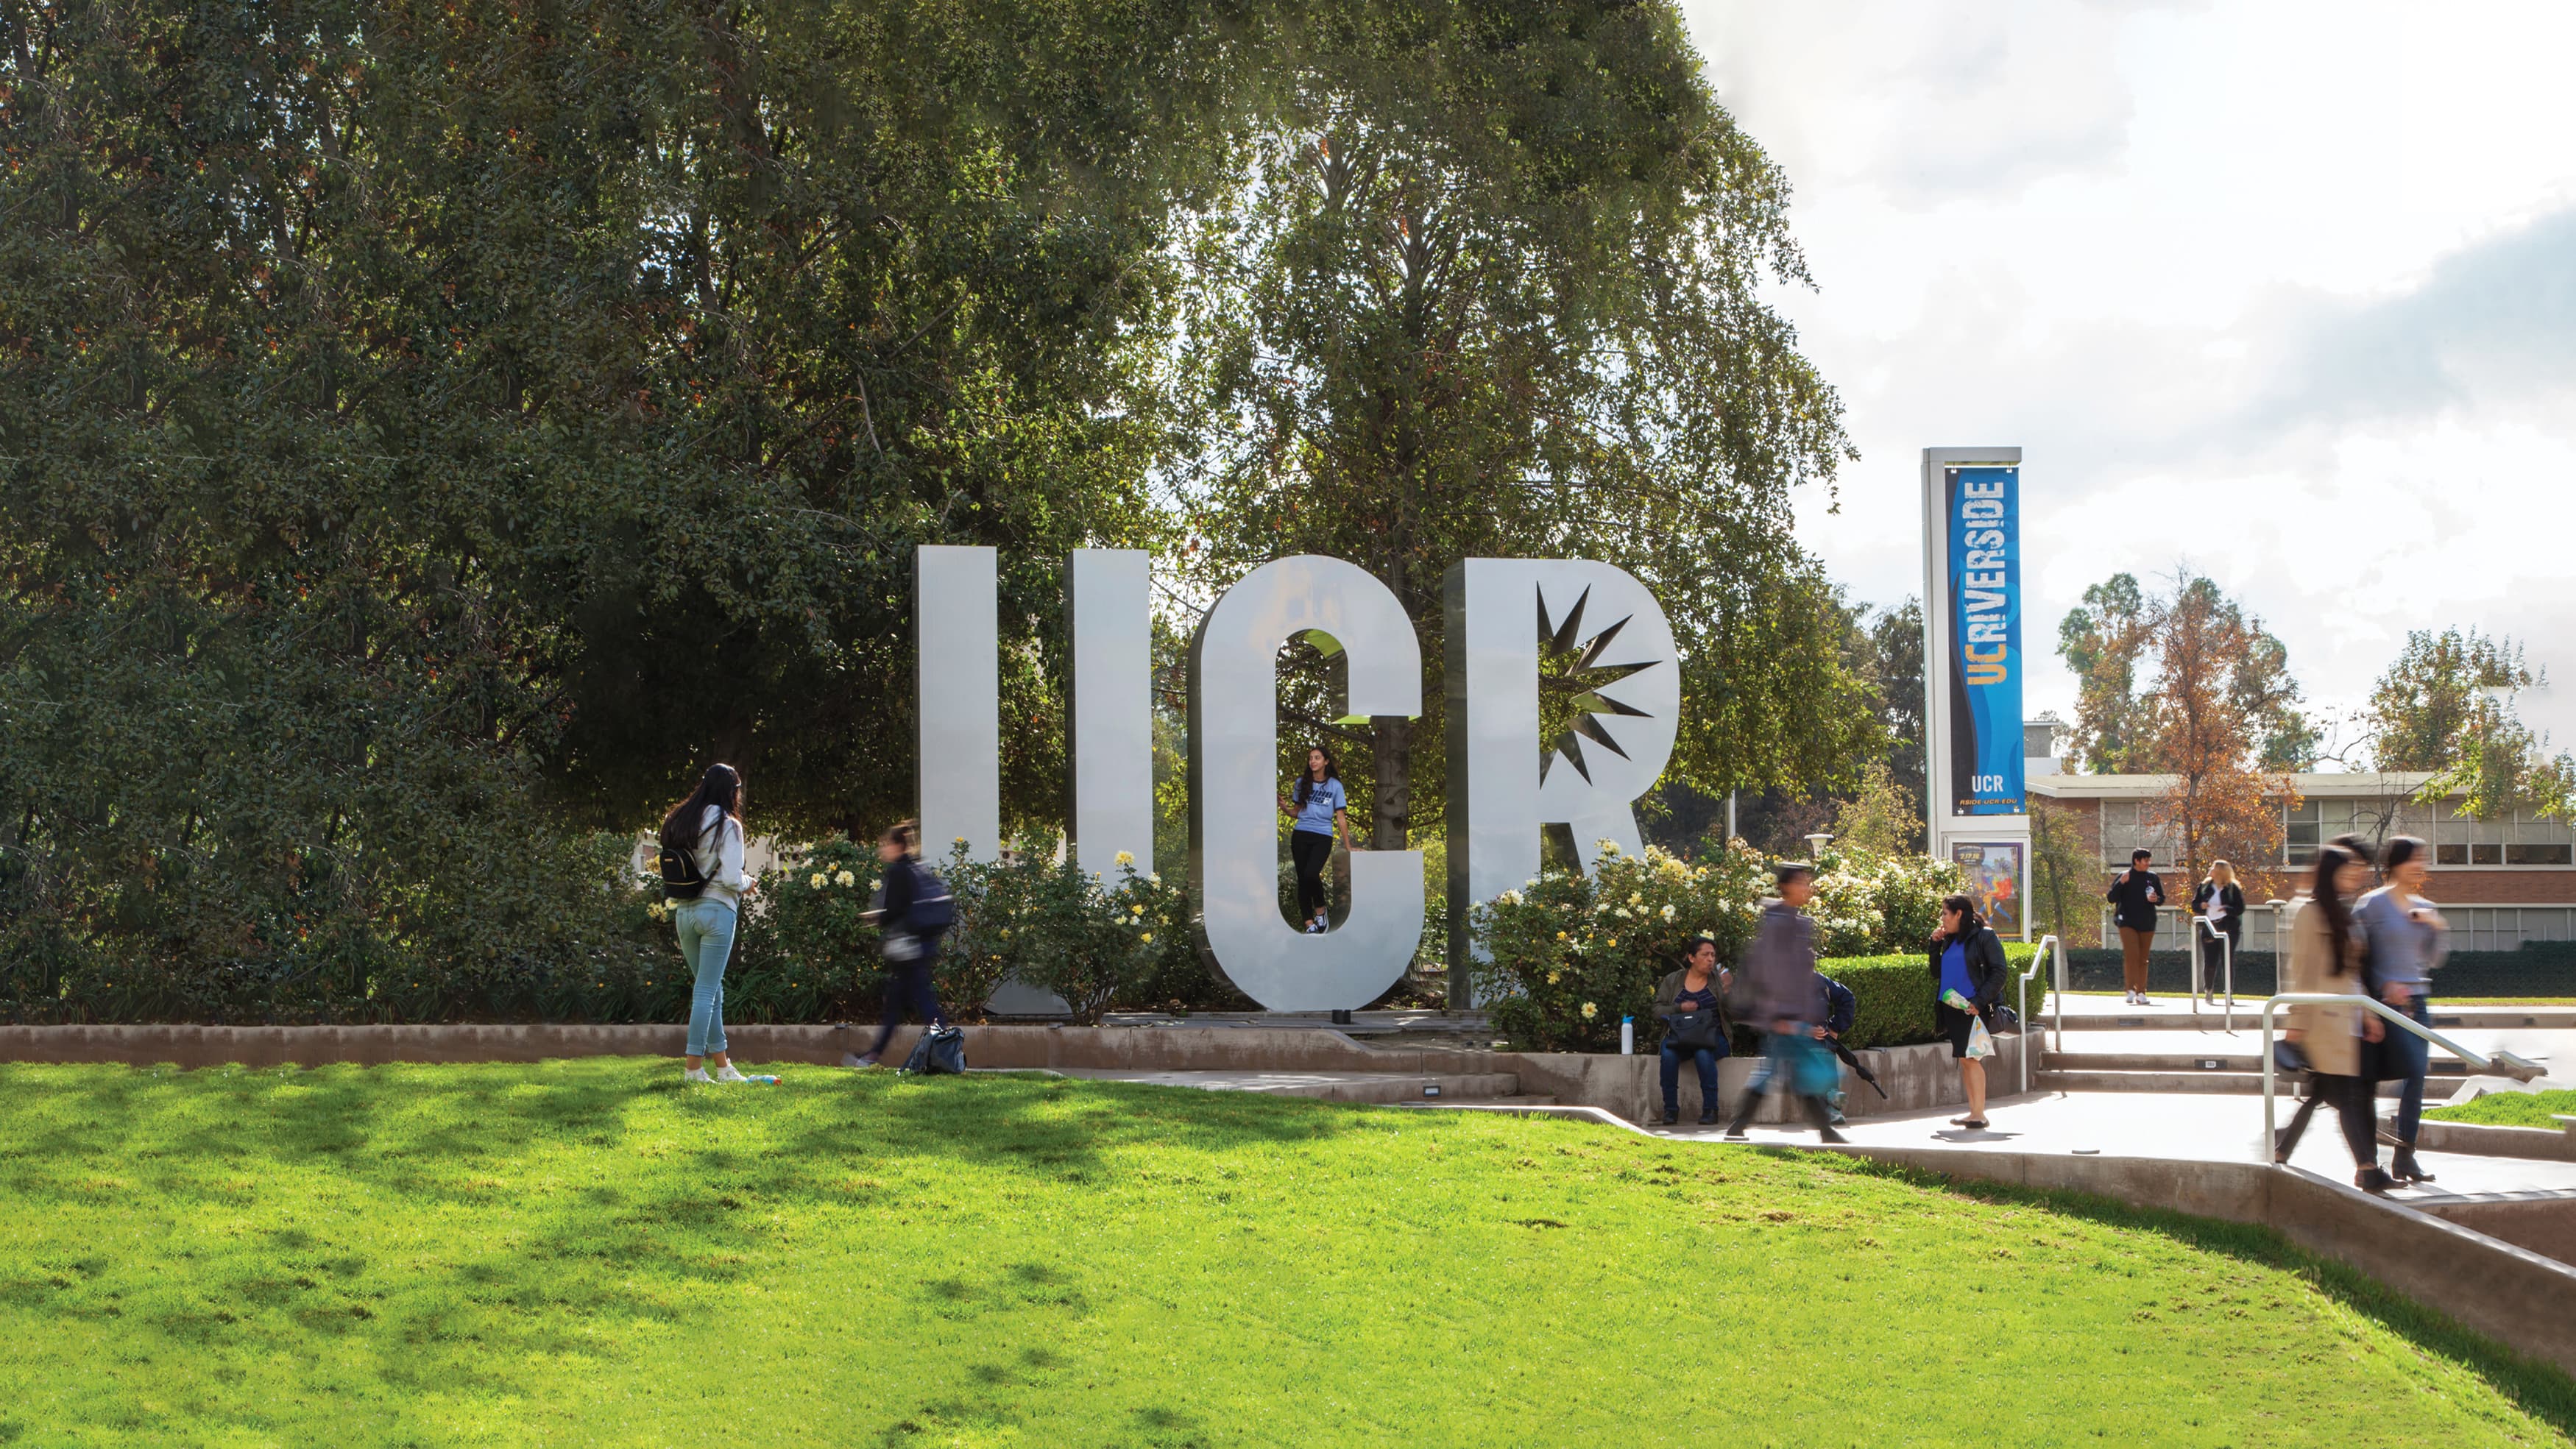 UC Riverside quad with sculptural UCR letters and students bustling